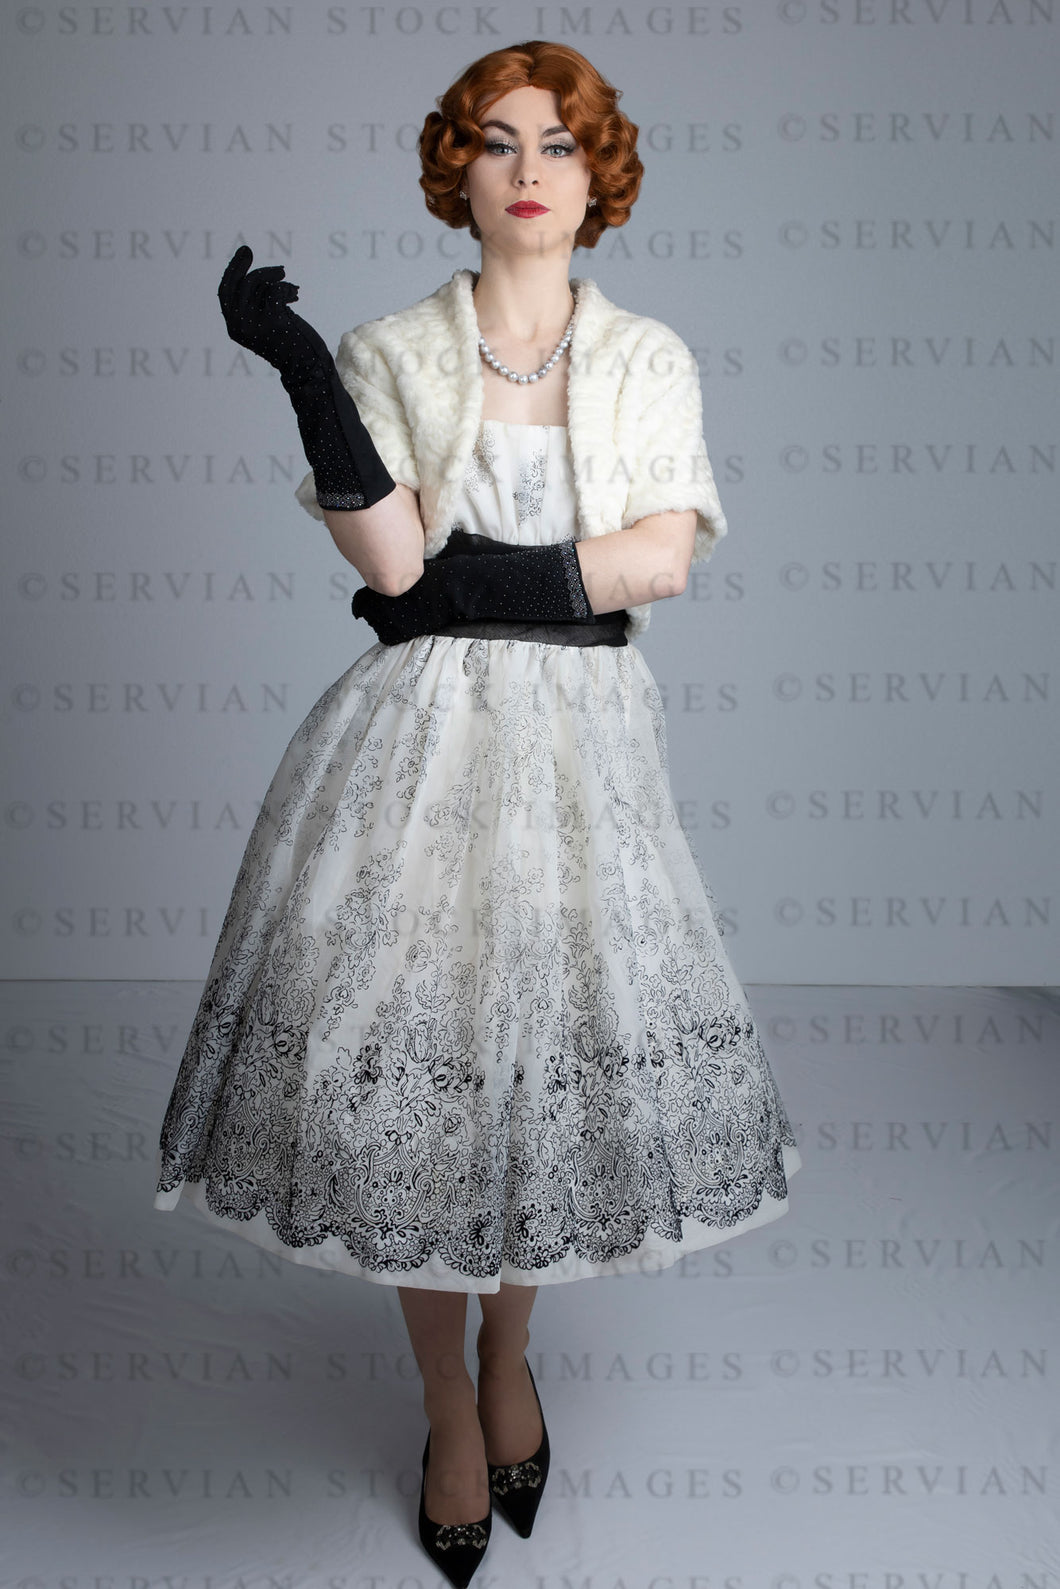 1950s woman in vintage dress, white fur shrug, and black gloves (Lacey 2494)